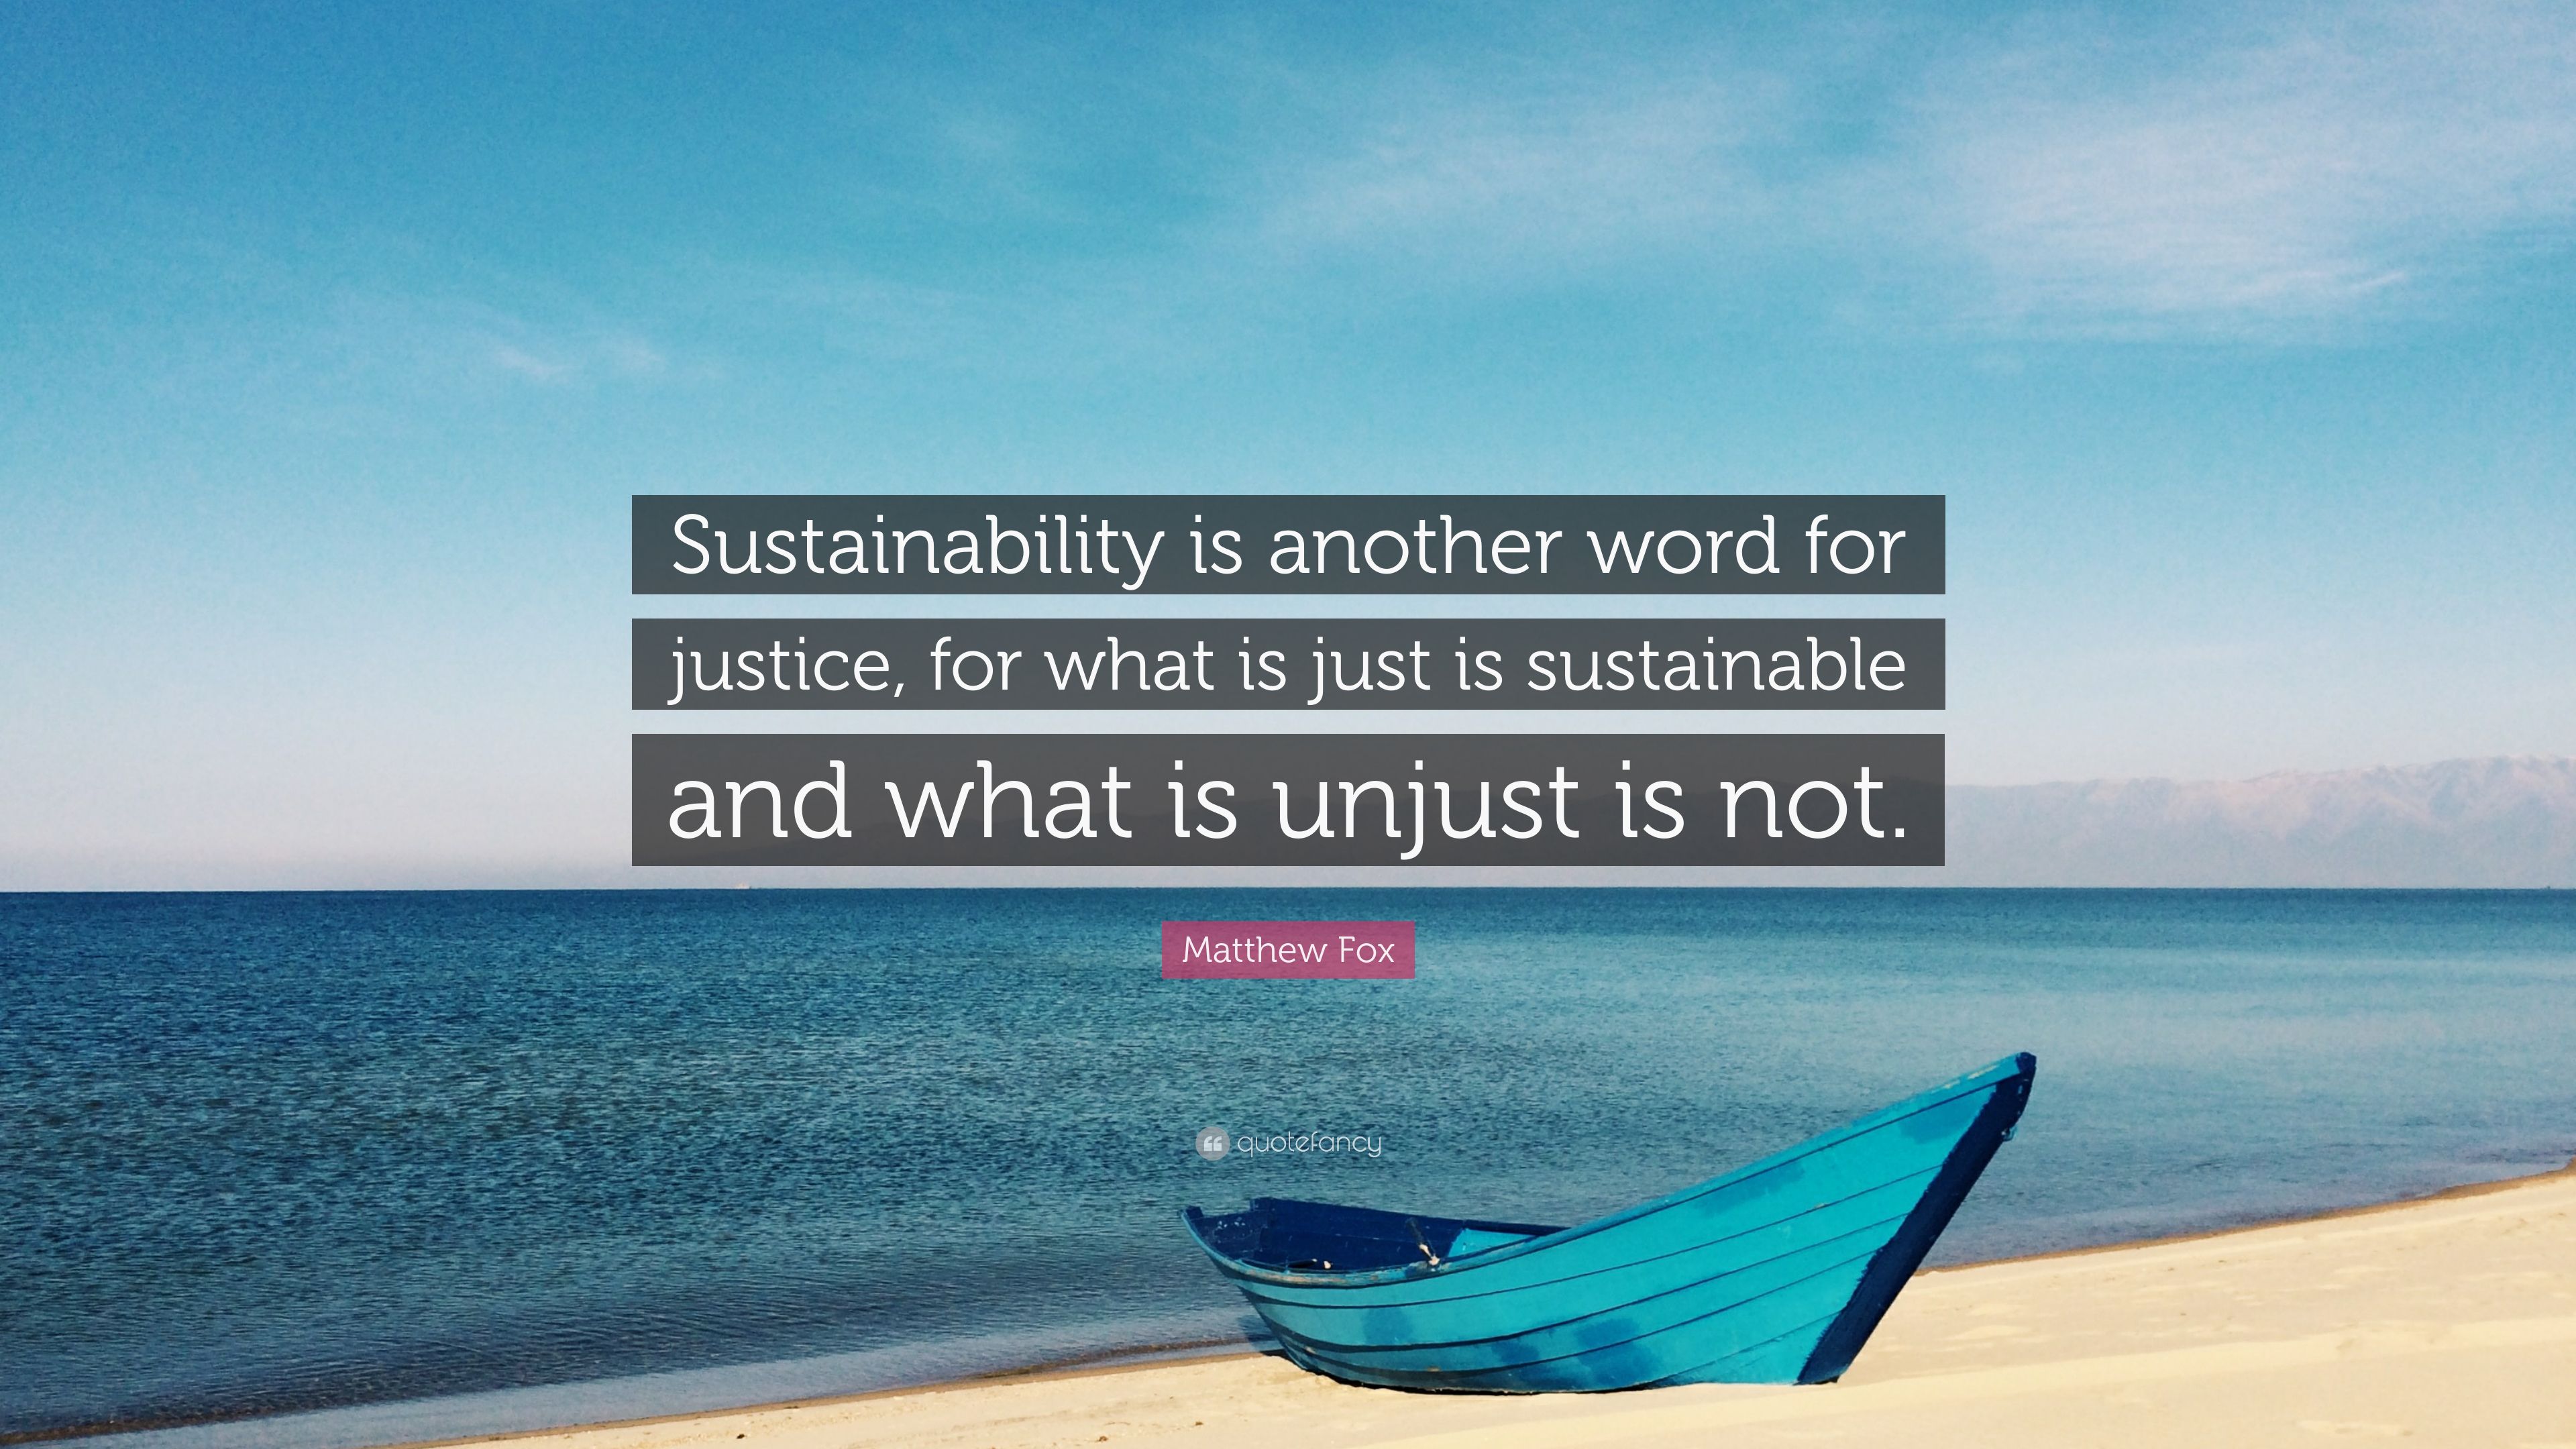 Matthew Fox Quote: “Sustainability is another word for justice, for what is just is sustainable and what is unjust is not.” (7 wallpaper)